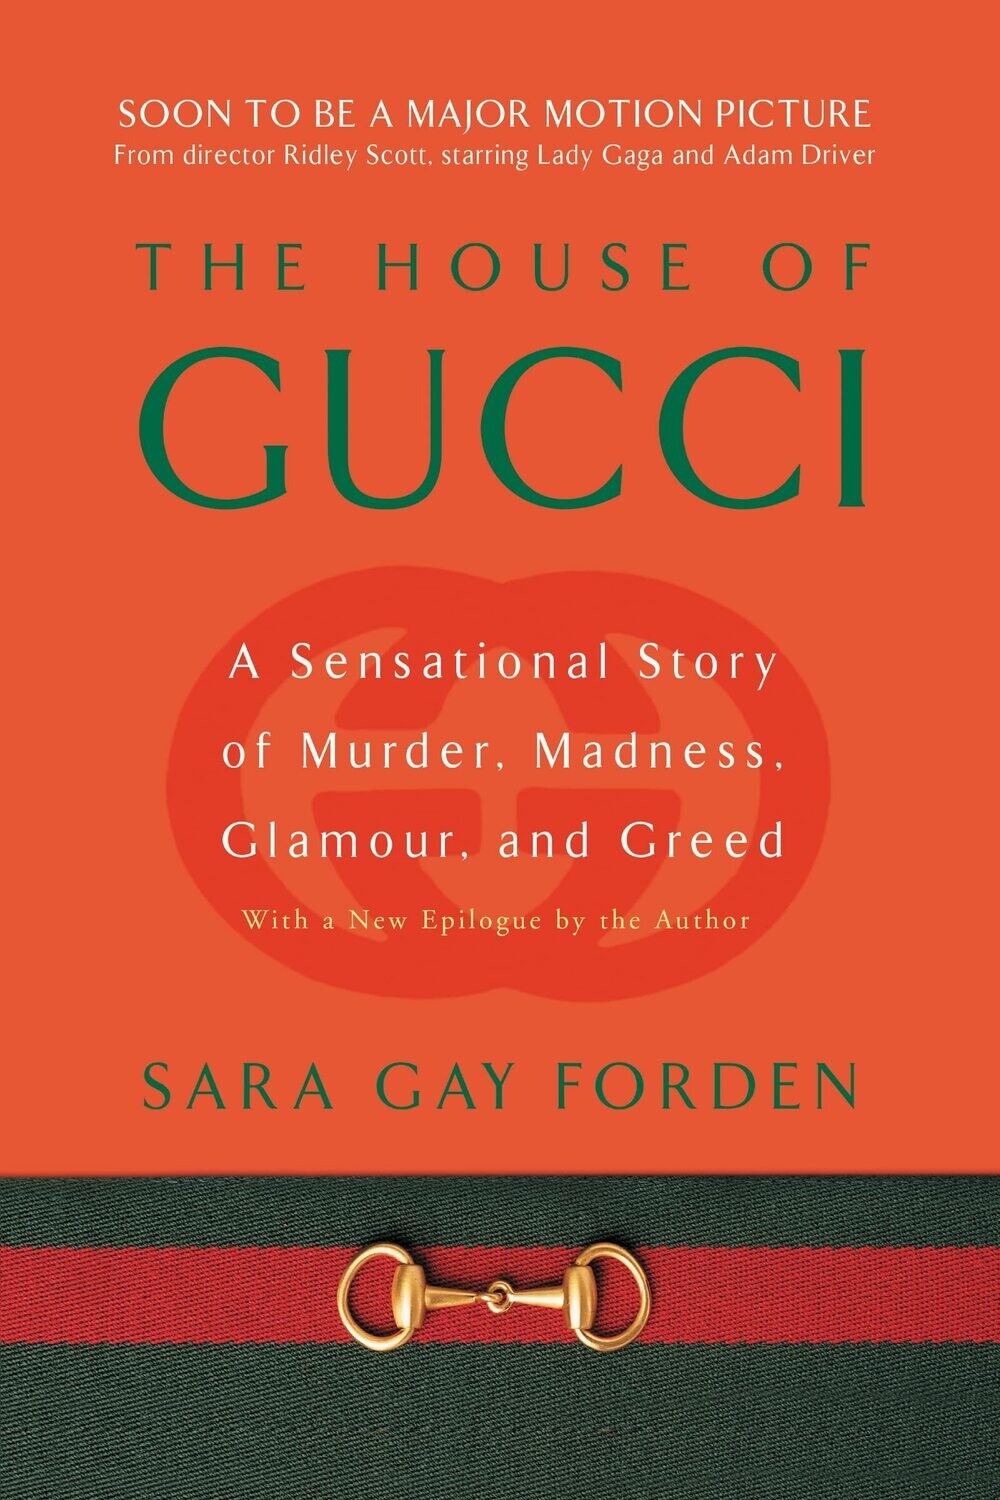 The House of Gucci: A Sensational Story of Murder, Madness, Glamour, and Greed (Paperback, NEW)